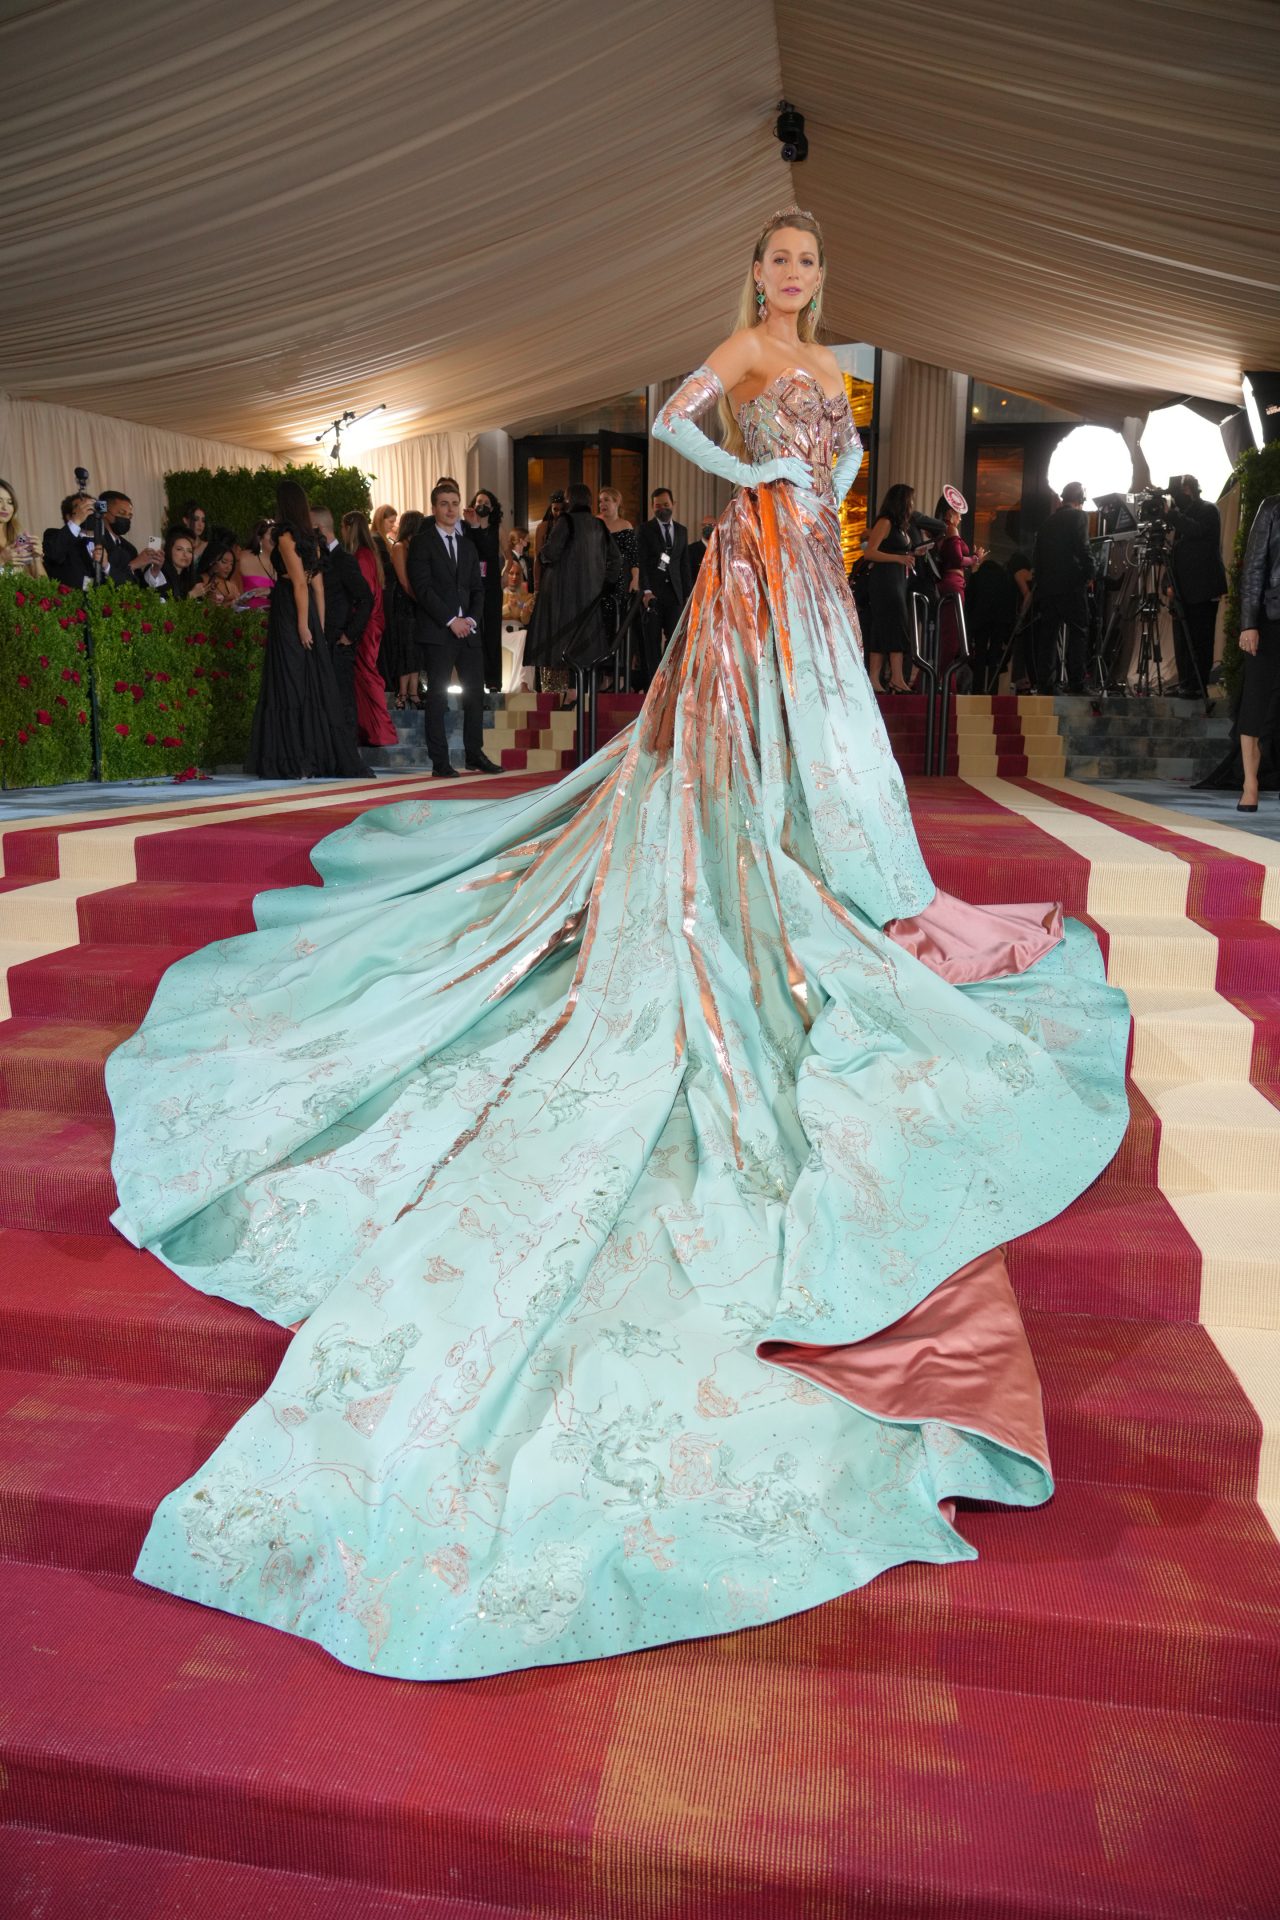 NEW YORK, NEW YORK - MAY 02: (Exclusive Coverage) Blake Lively arrives at The 2022 Met Gala Celebrating "In America: An Anthology of Fashion" at The Metropolitan Museum of Art on May 02, 2022 in New York City. (Photo by Kevin Mazur/MG22/Getty Images for The Met Museum/Vogue )